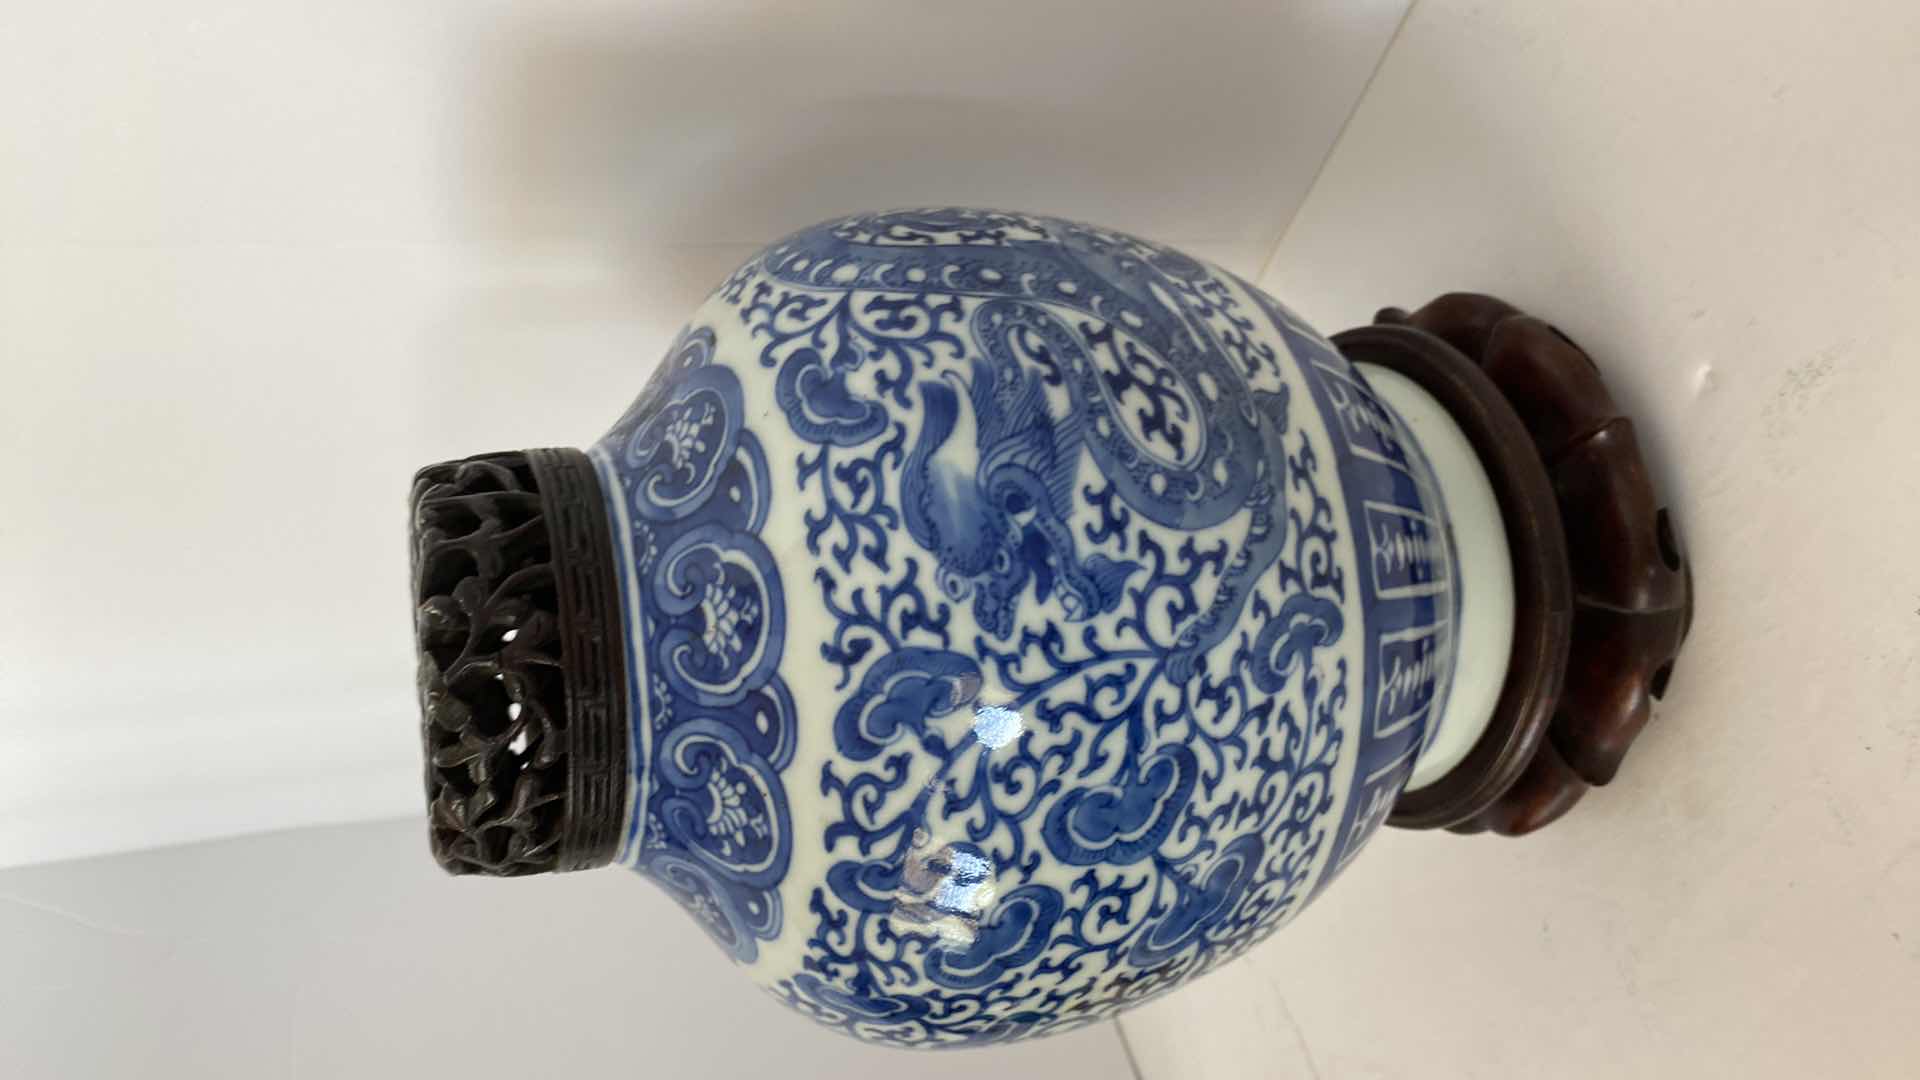 Photo 3 of VINTAGE CHINESE IMPERIAL BLUE AND WHITE VASE ON STAND VASE 7” x 9 1/2”